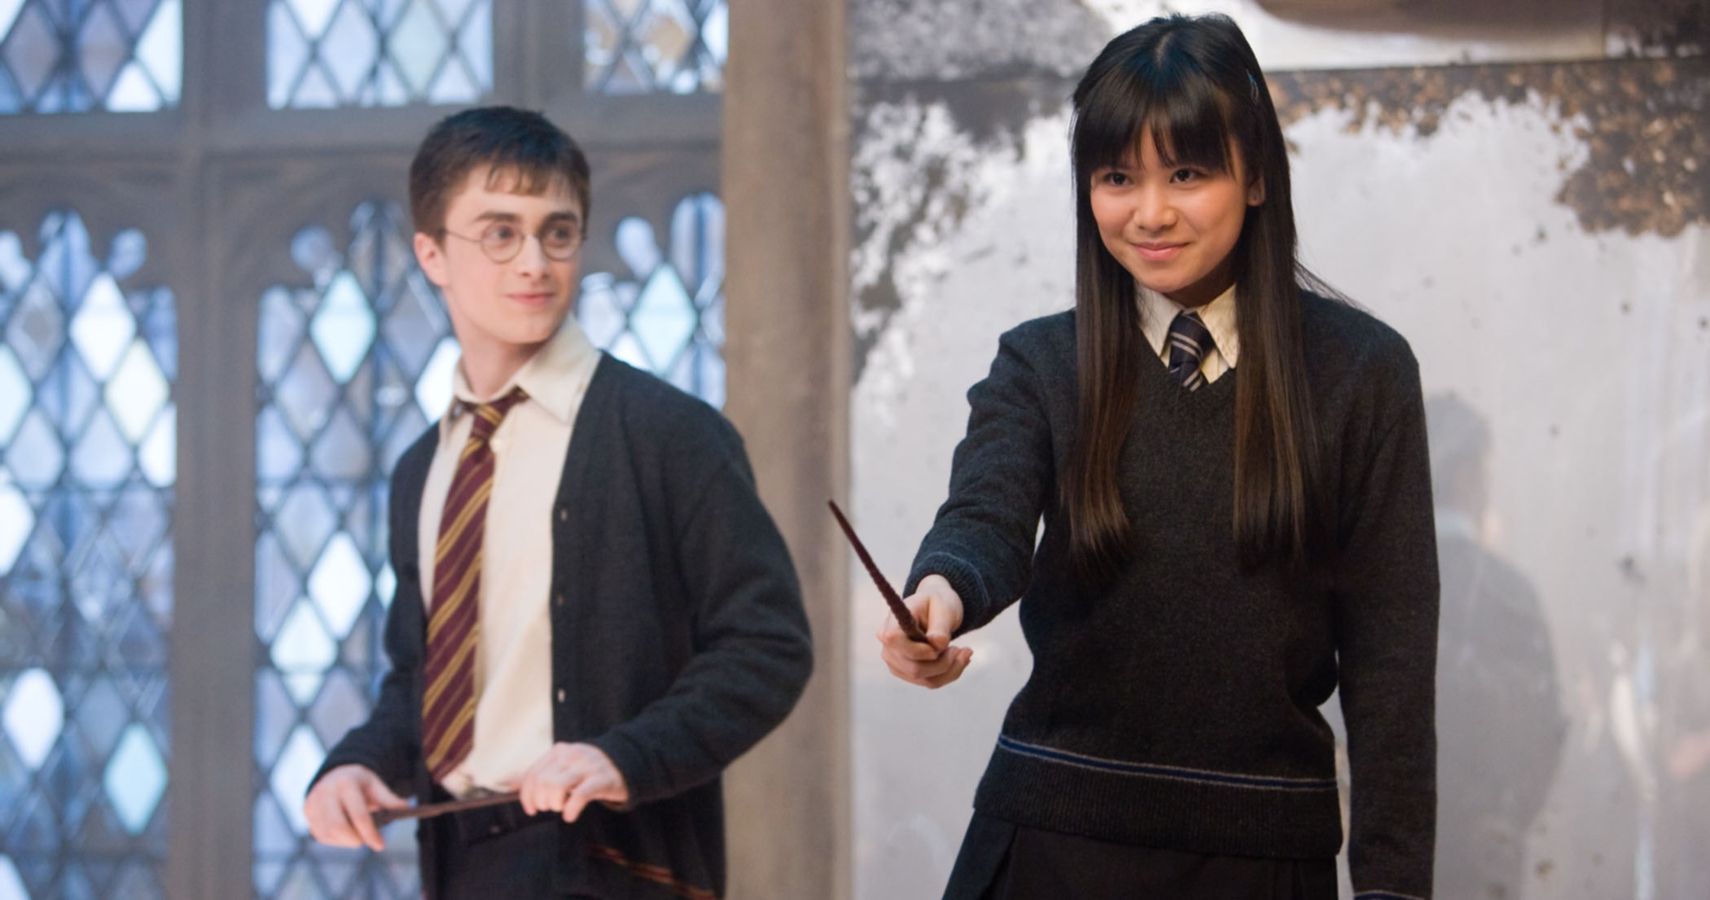 Harry Potter Actor Katie Leung Says She Was Told To Deny Her Experiences With Anti-Asian Racism